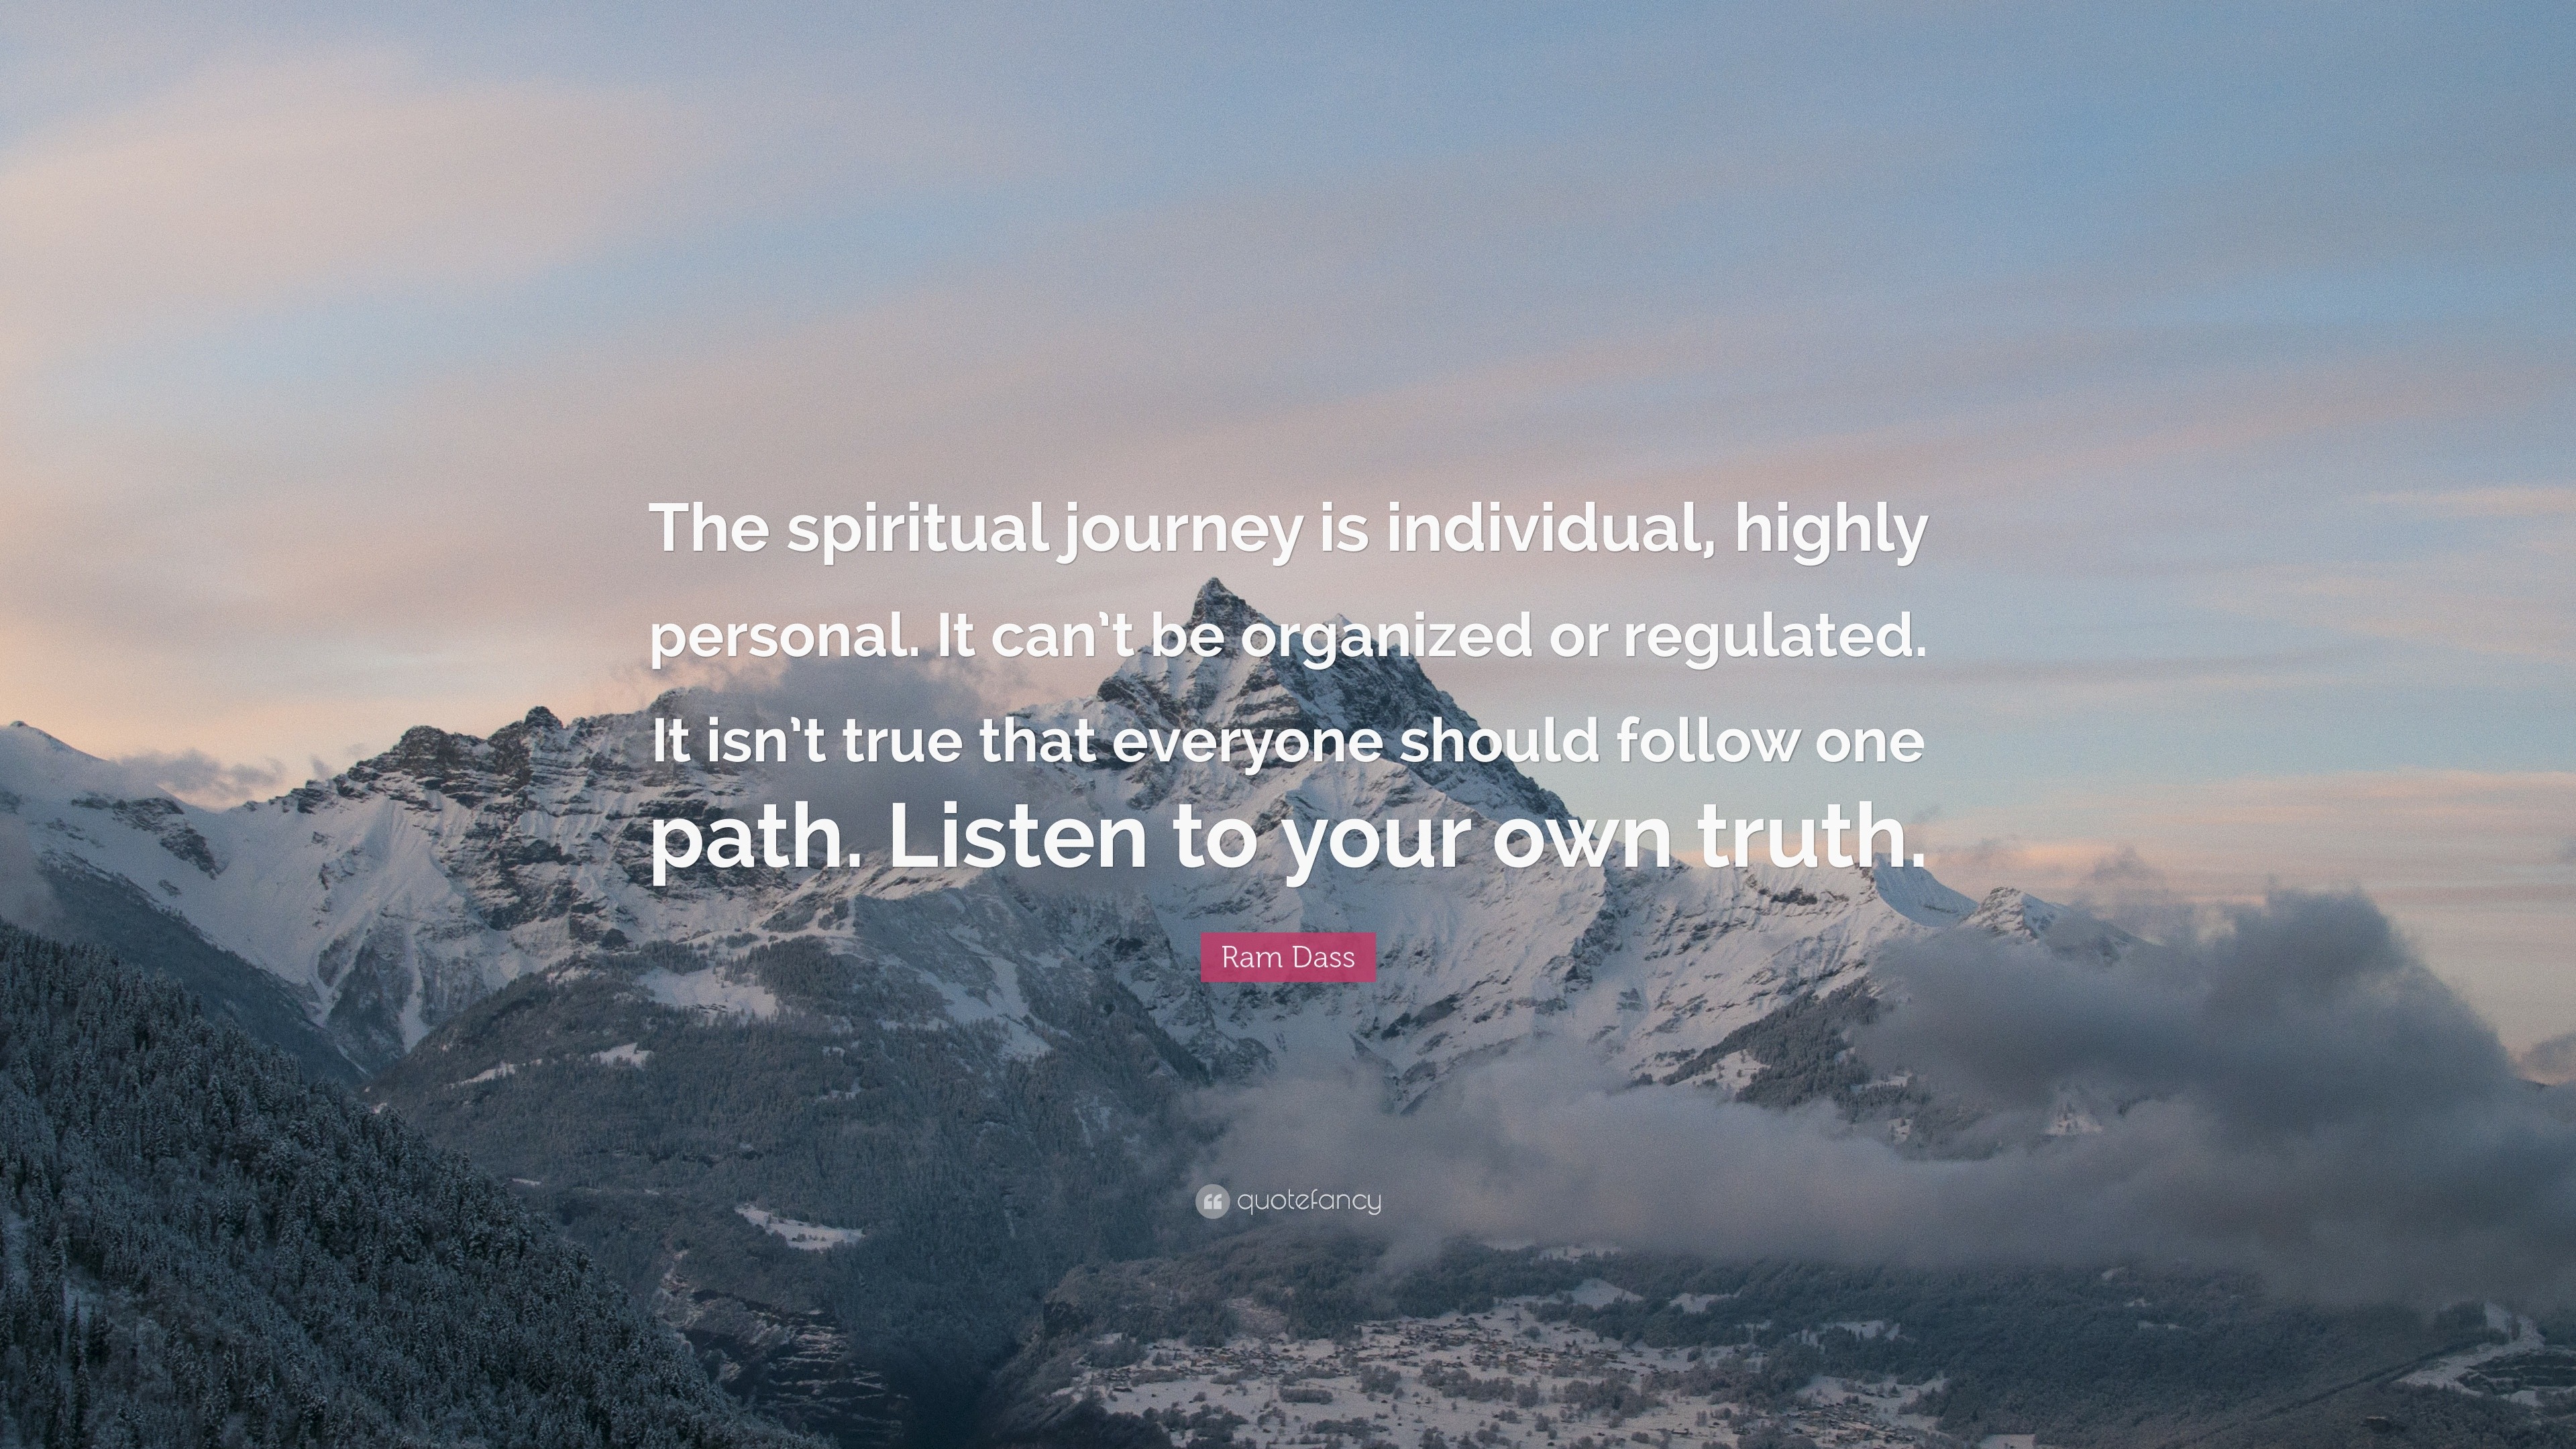 52193 Ram Dass Quote The spiritual journey is individual highly personal